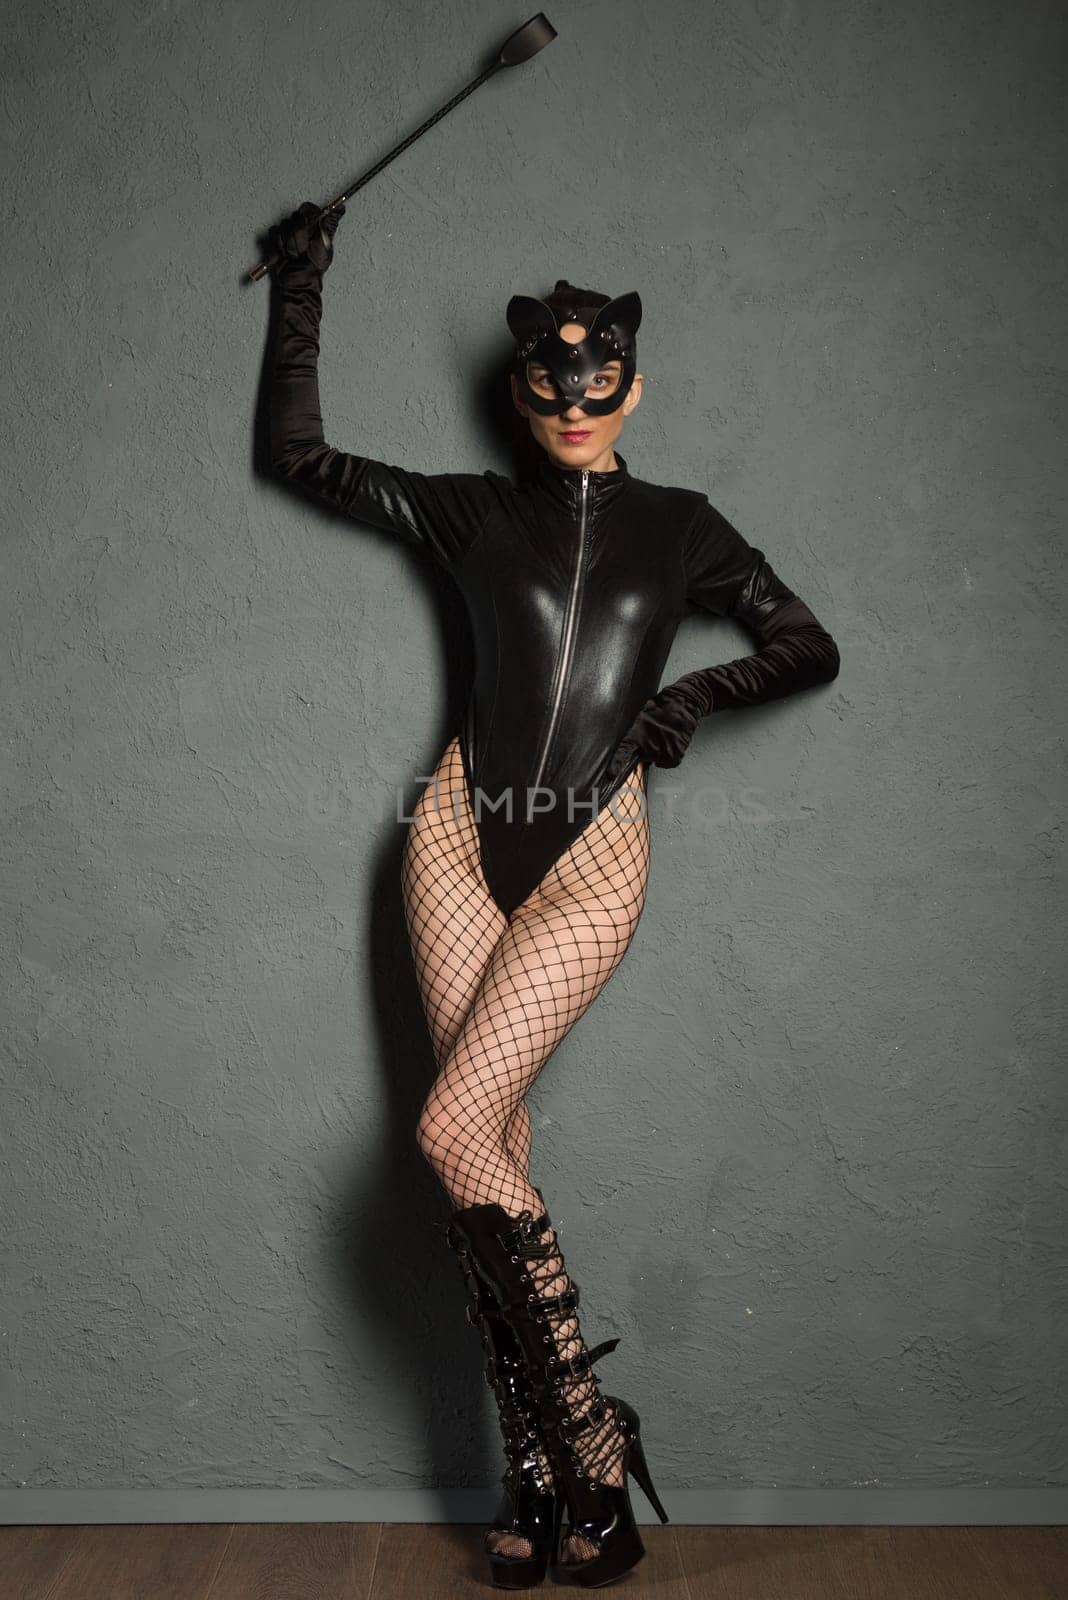 Adult sex games. Beautiful dominant brunette vamp mistress girl in latex body, gloves and bdsm black leather fetish cat mask posing with riding crop. - image